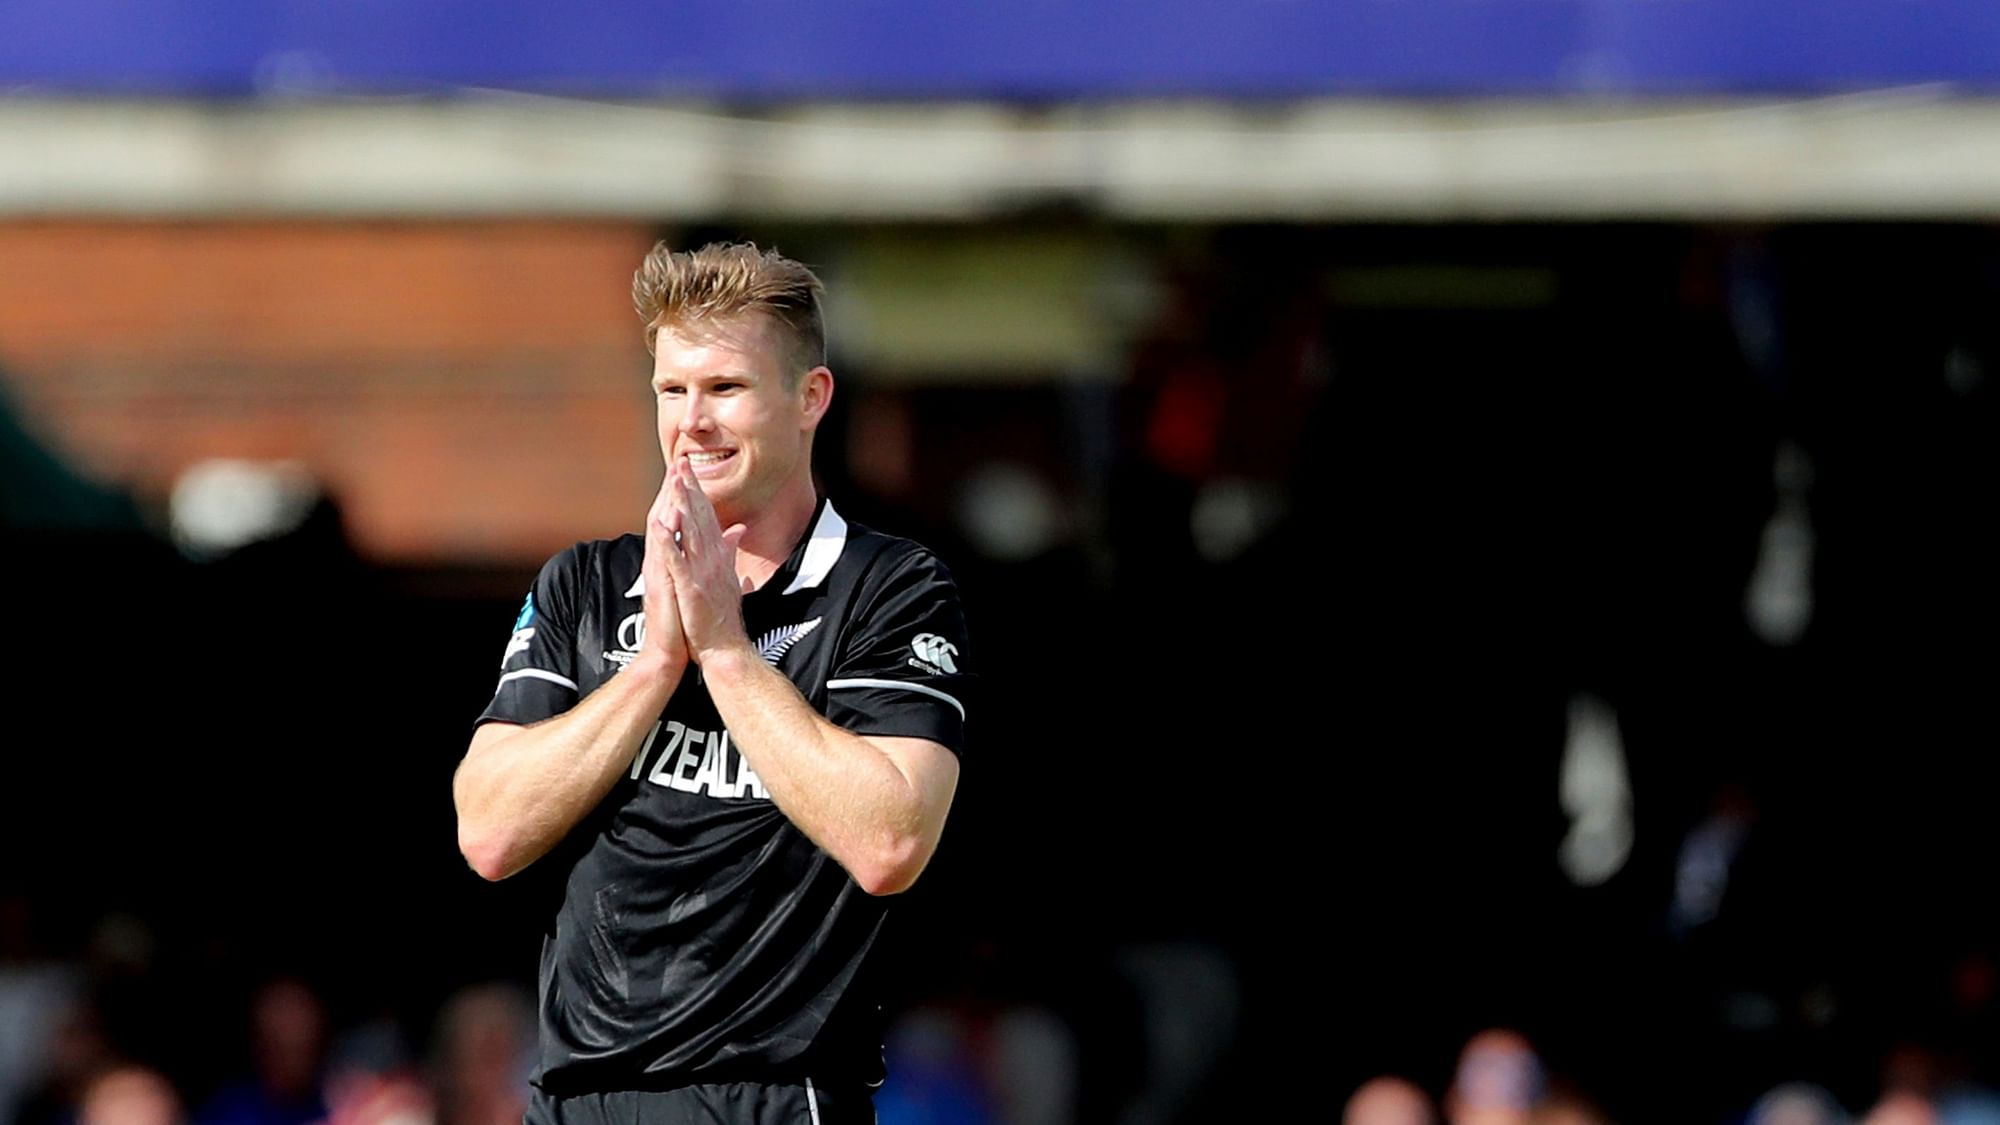 James Neesham provided Twitter with updates about what is happening in his native country.